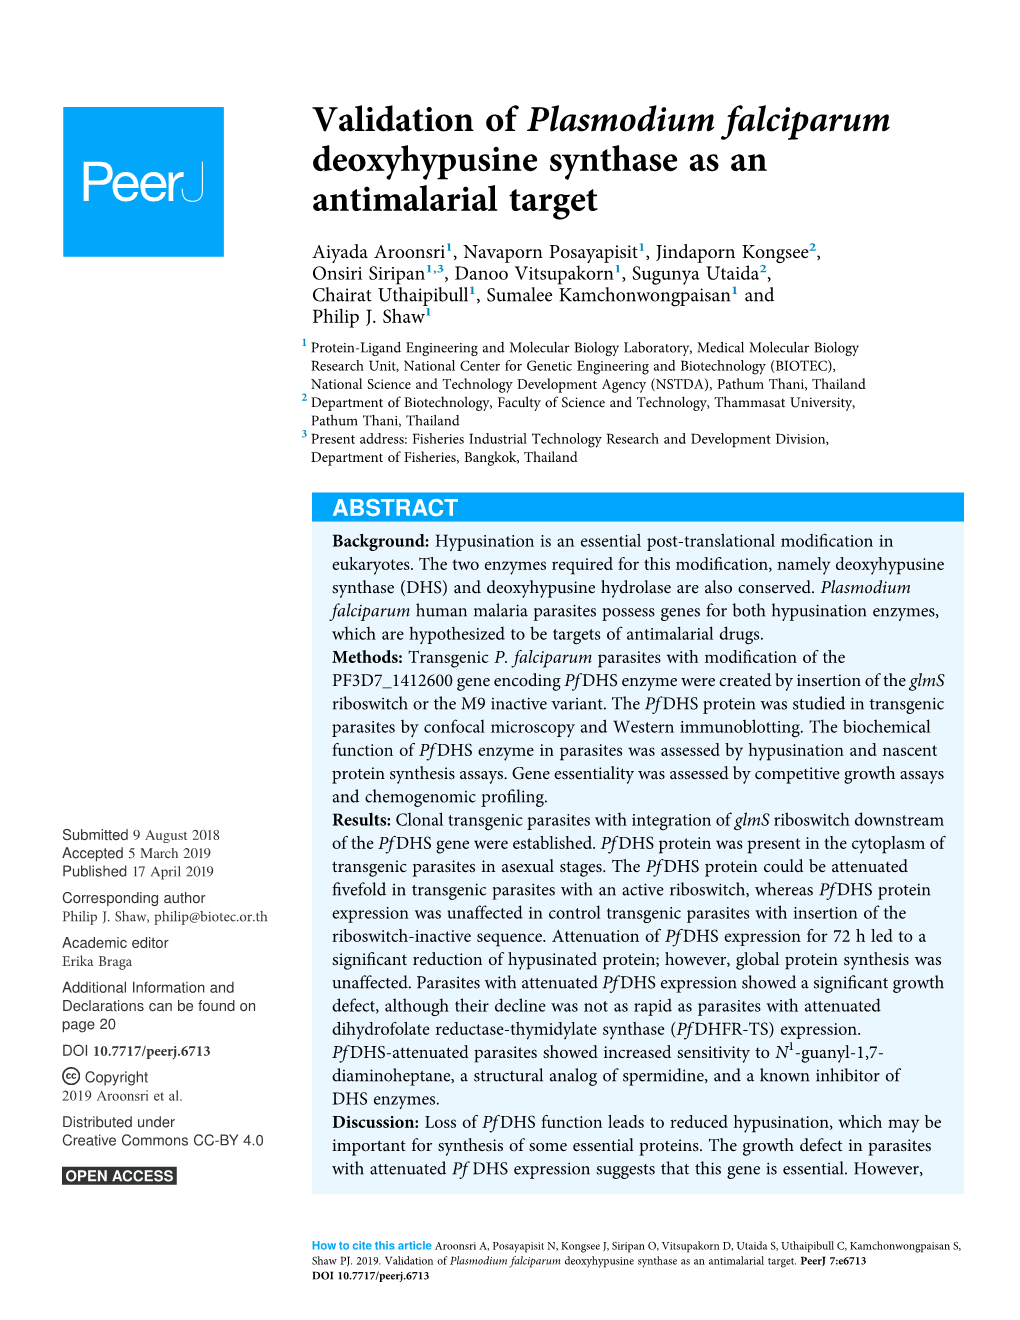 Deoxyhypusine Synthase As an Antimalarial Target